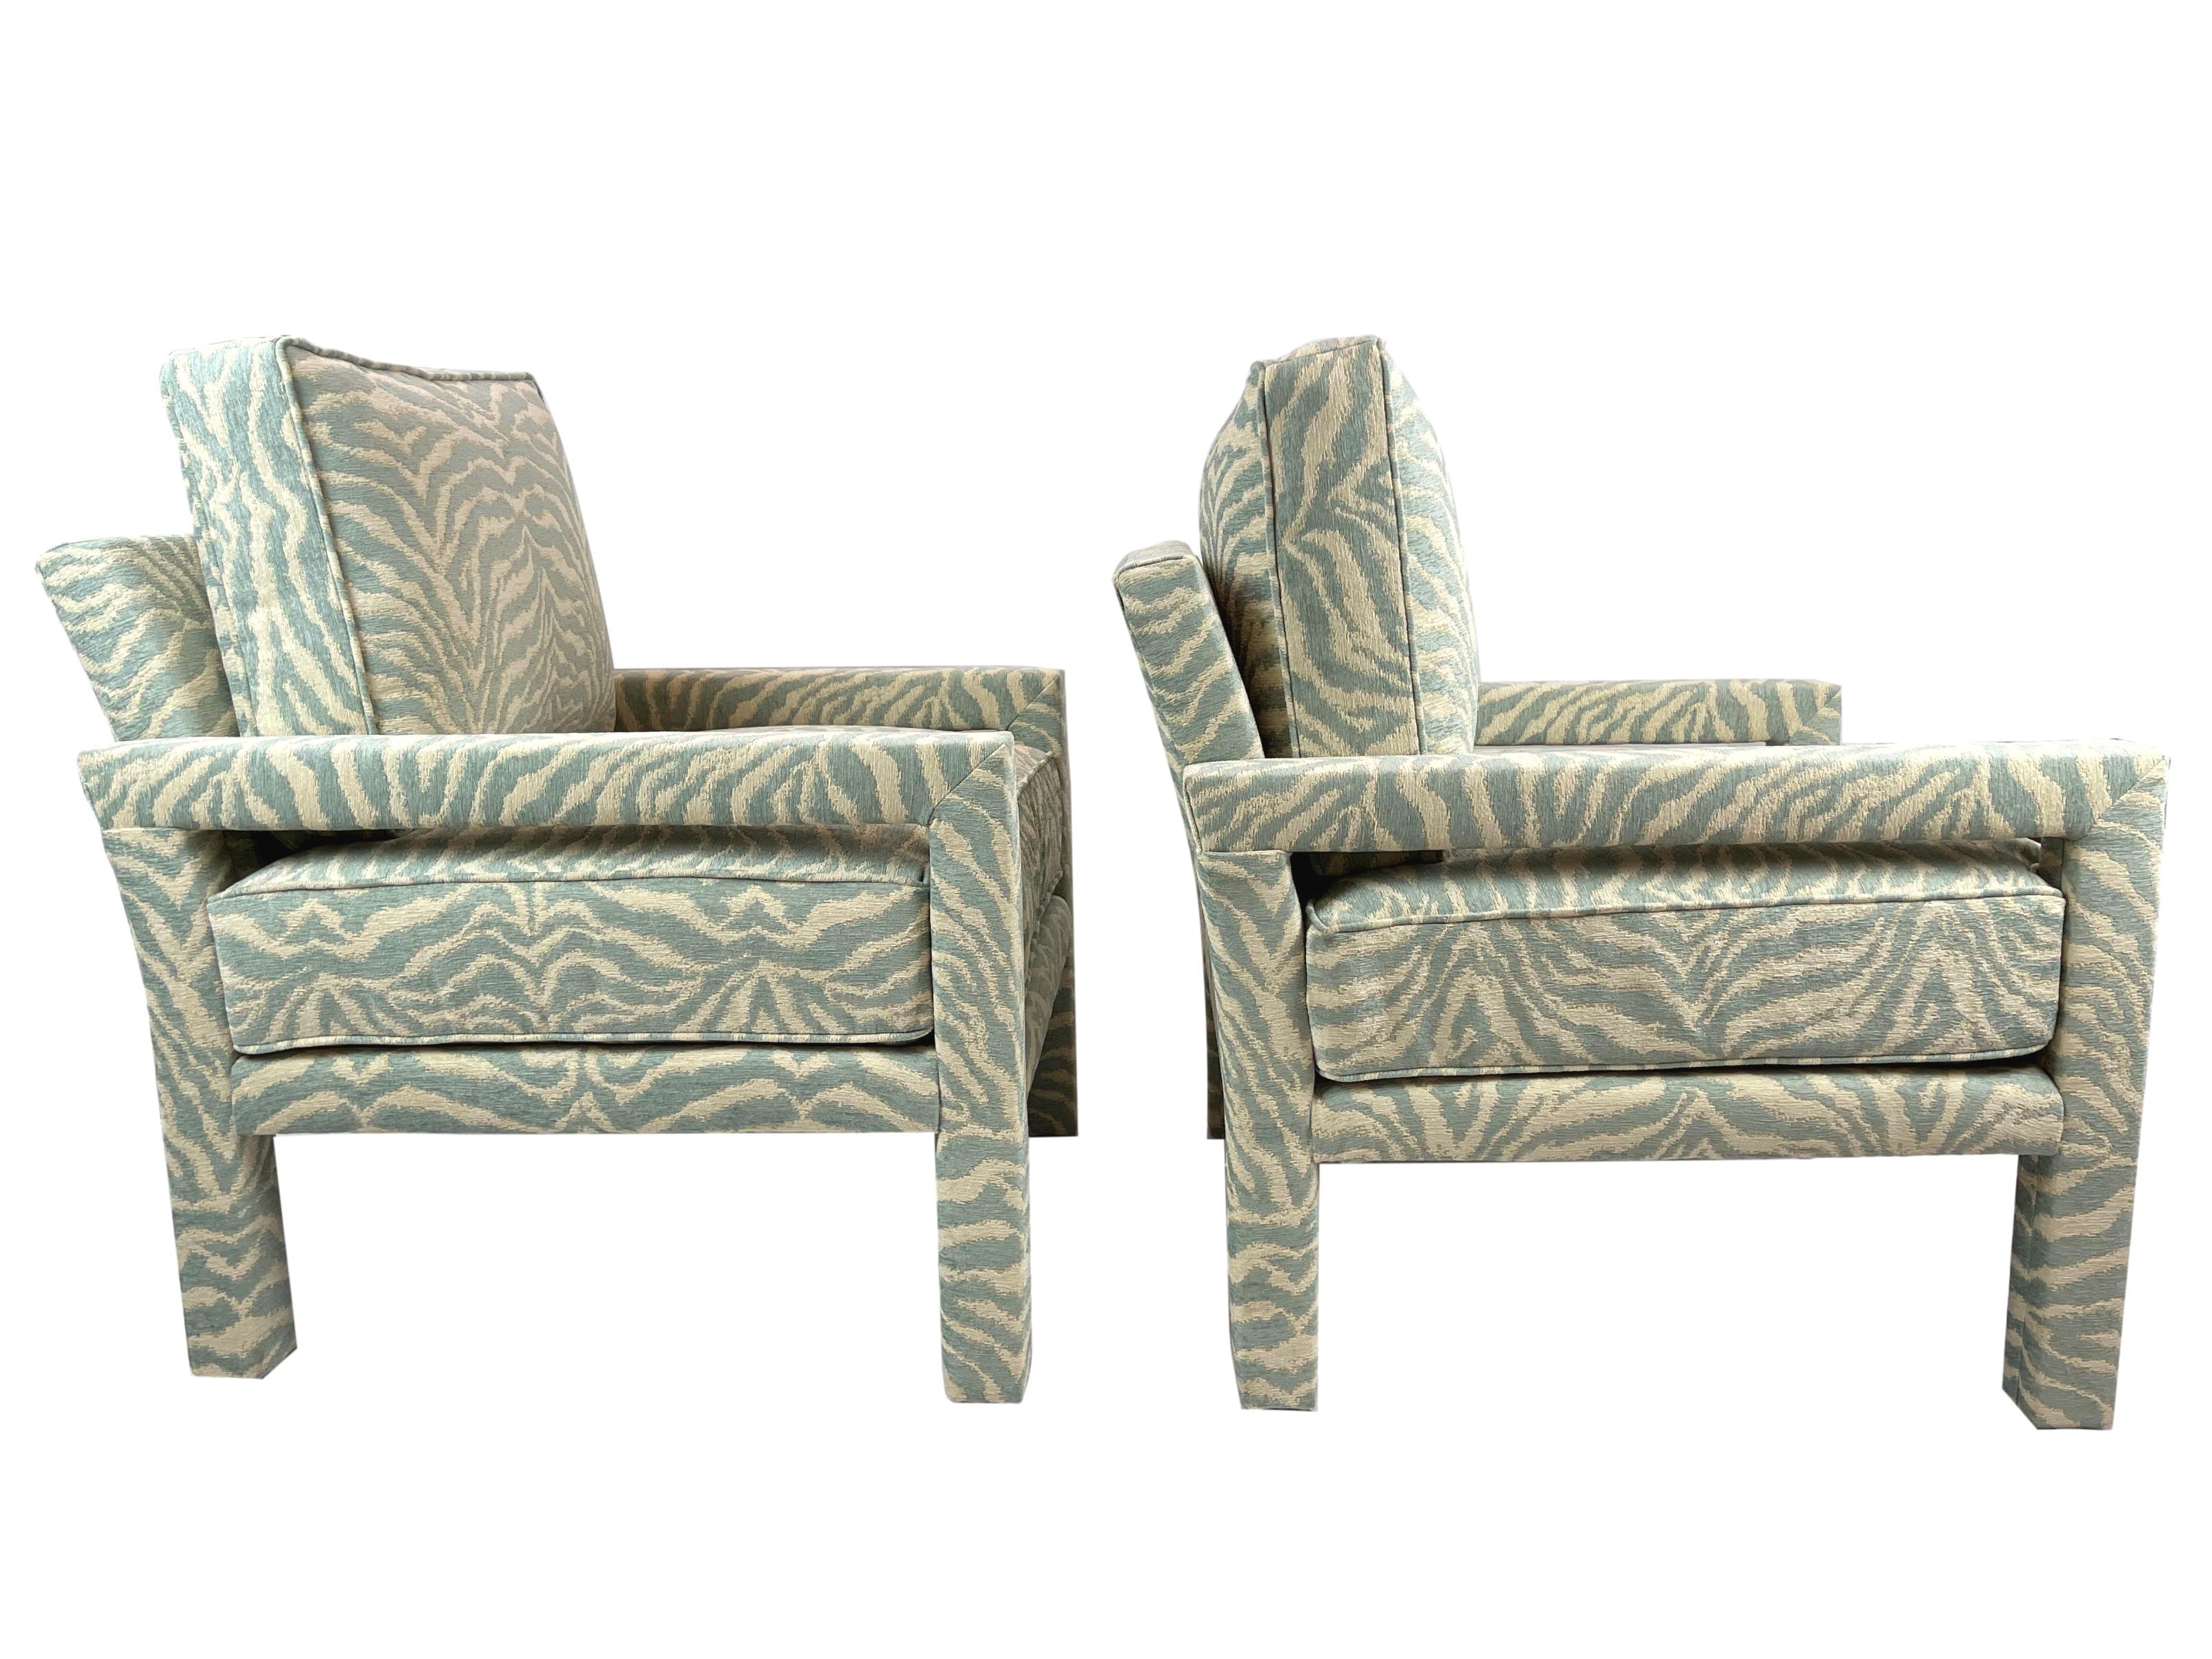 Mid-Century Modern New Pair of Milo Baughman Style Parsons Chairs in Designer Celadon Zebra Fabric For Sale